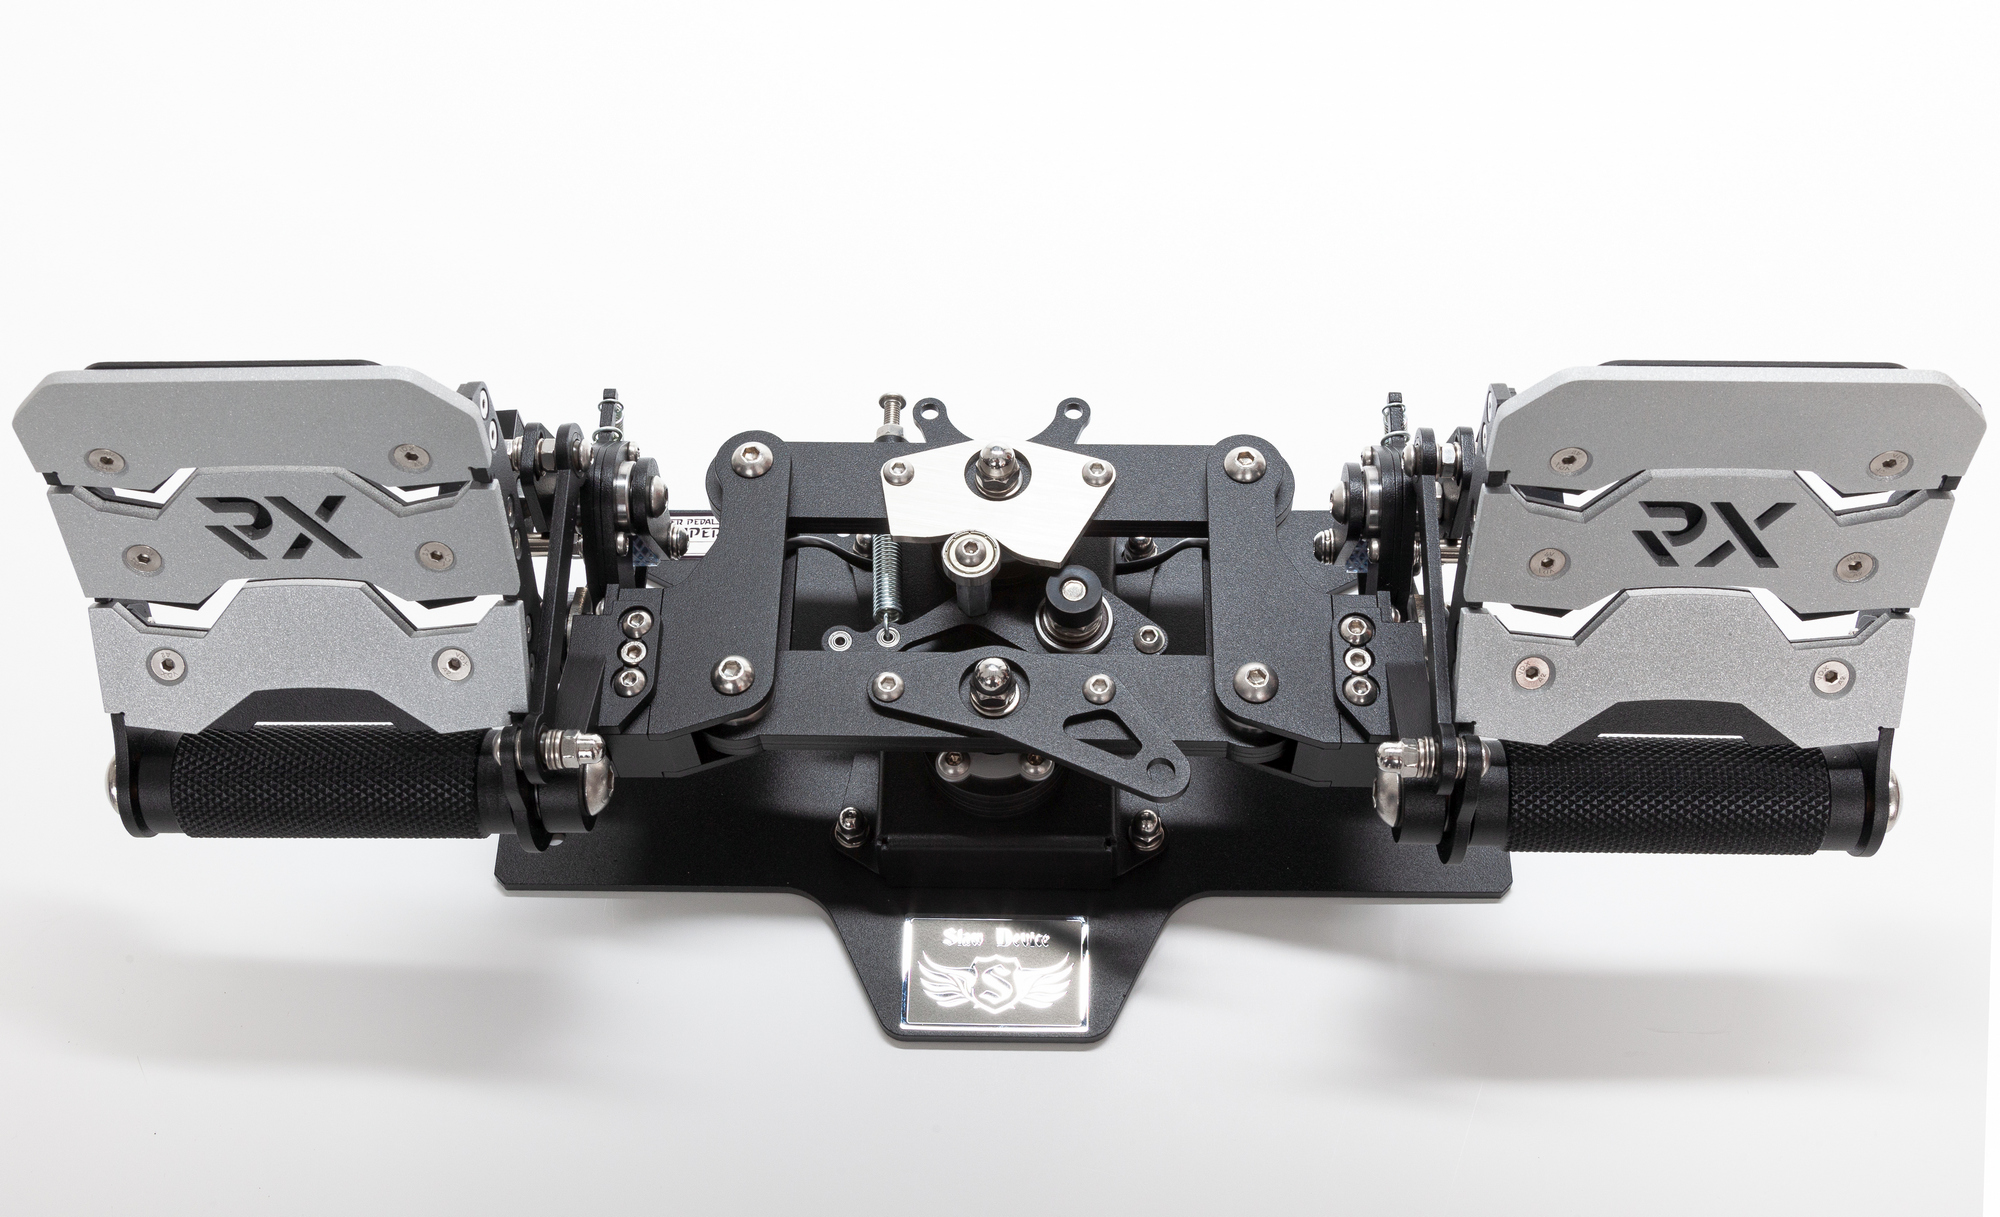 Slaw Device RX Viper V2 Rudder Pedals - PC Hardware and Related Software -  ED Forums